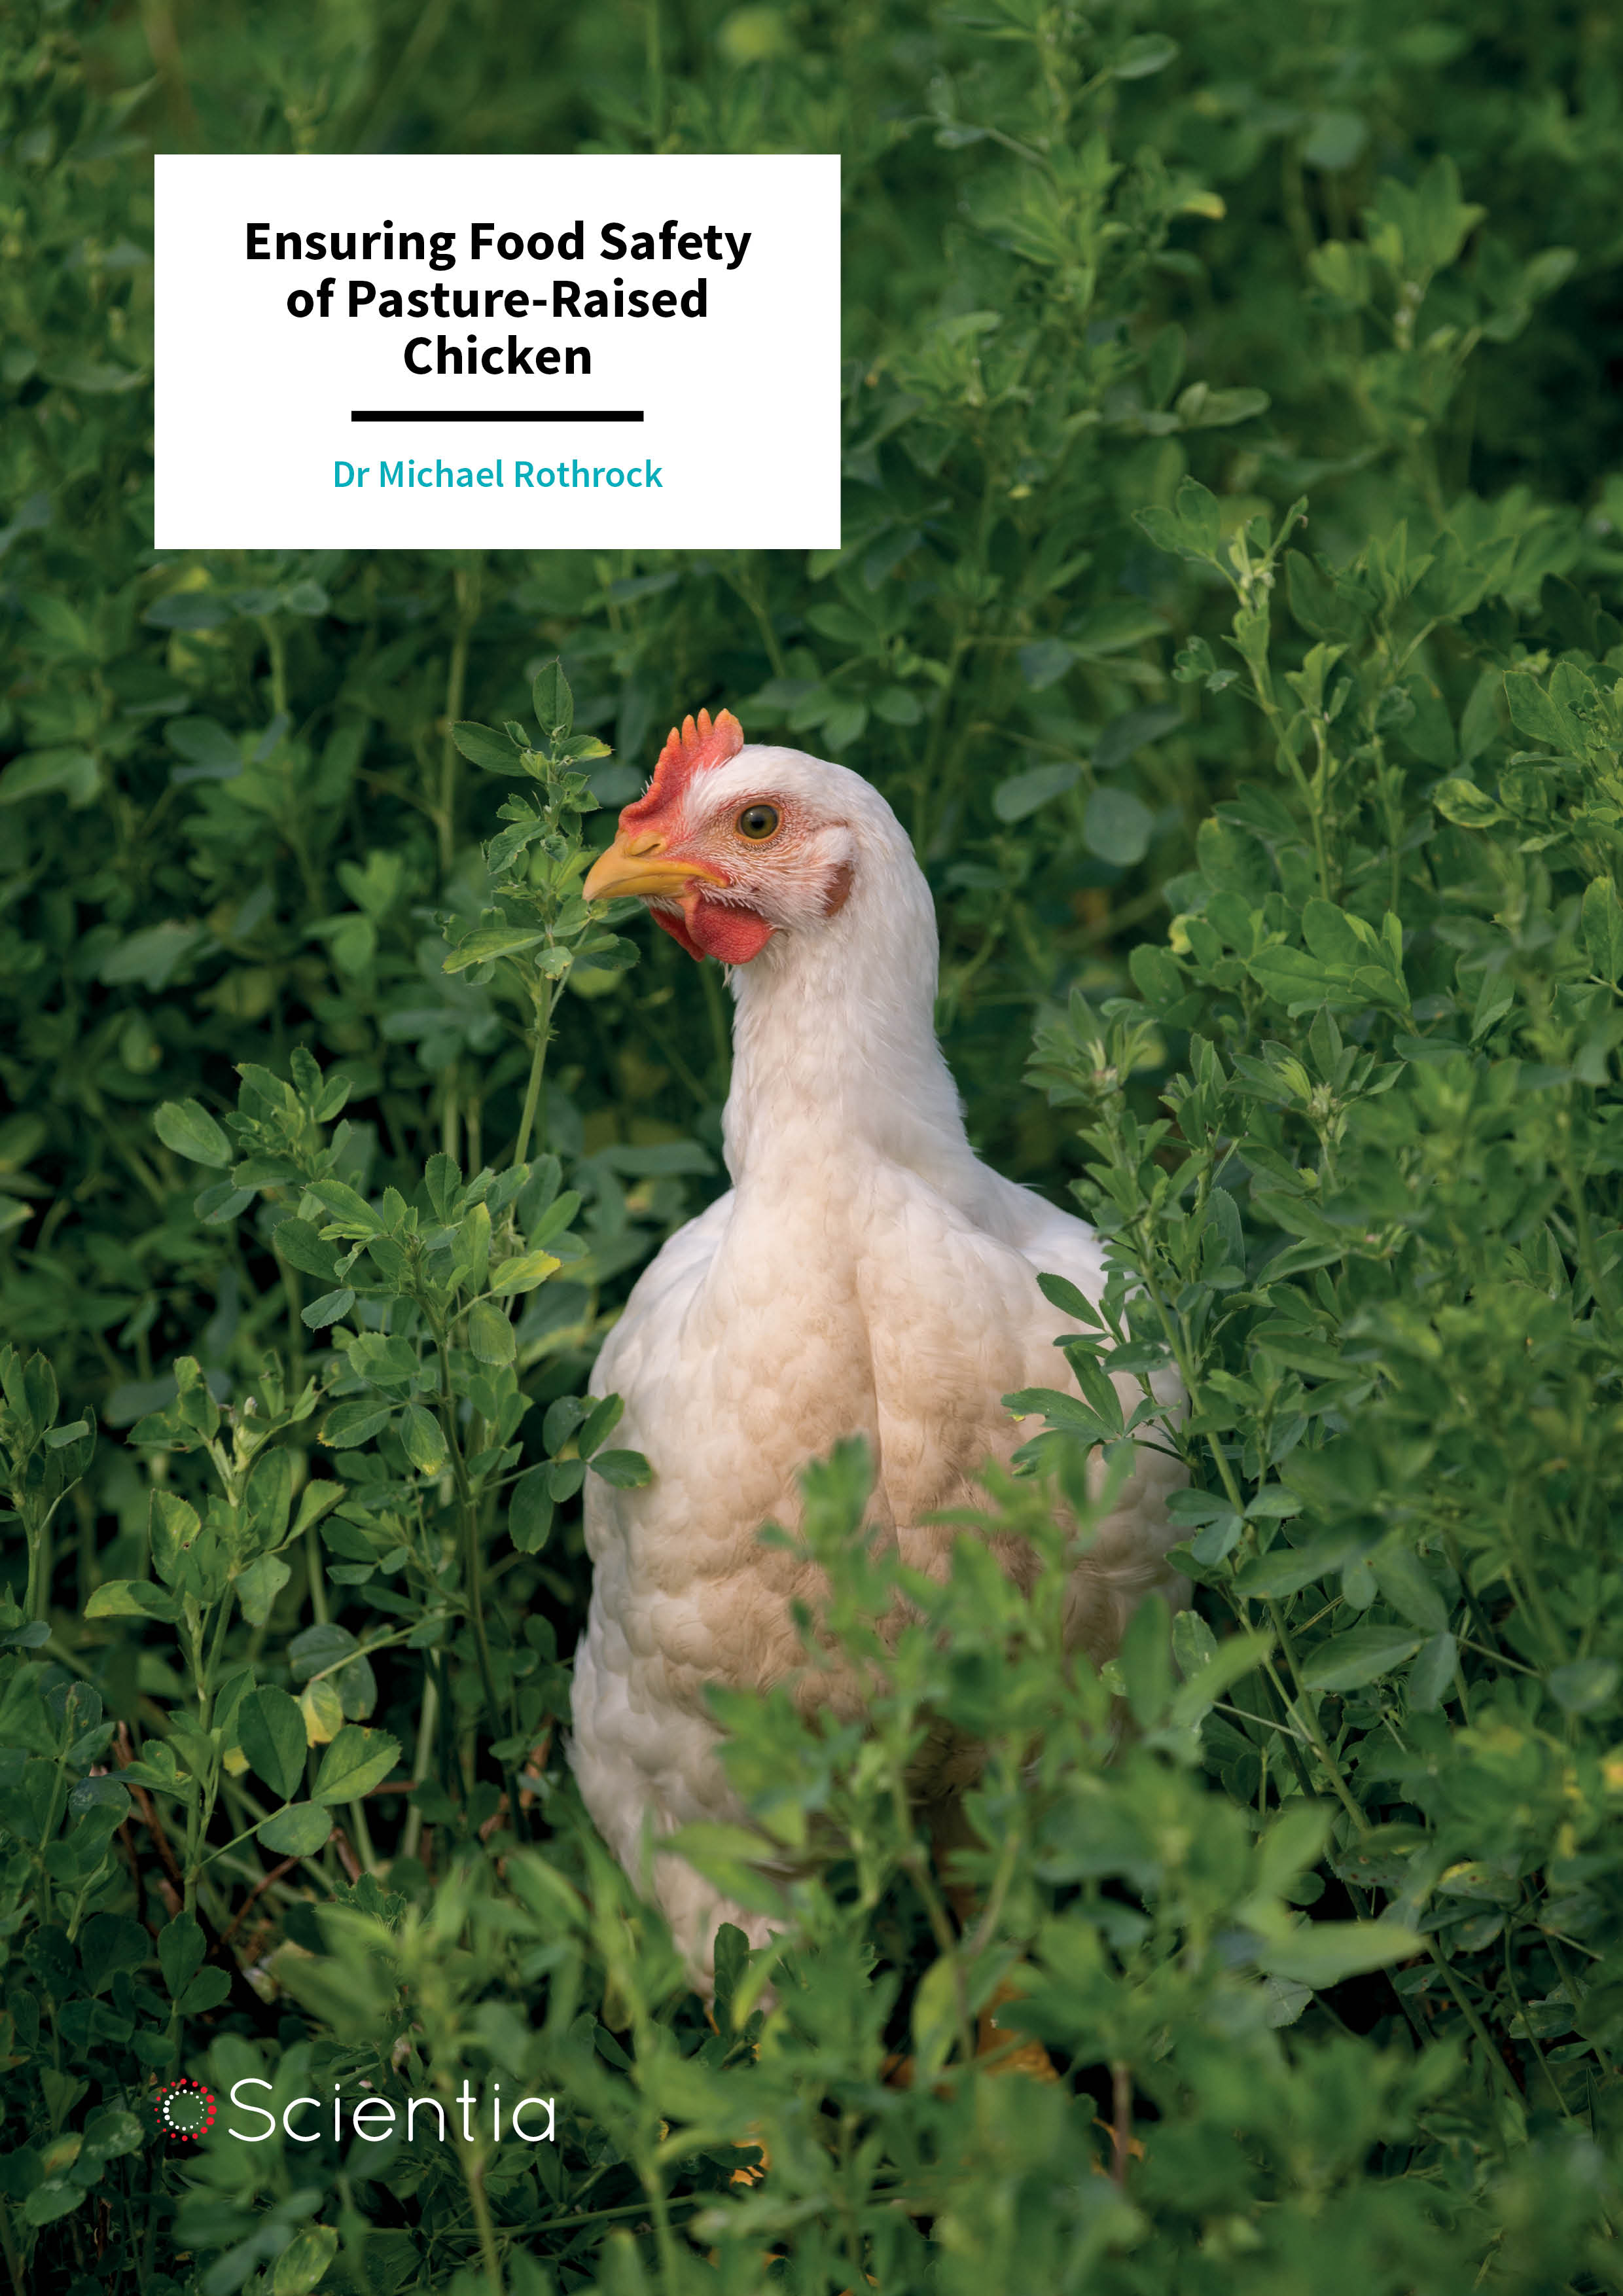 Dr Michael Rothrock – Ensuring Food Safety of Pasture-Raised Chicken